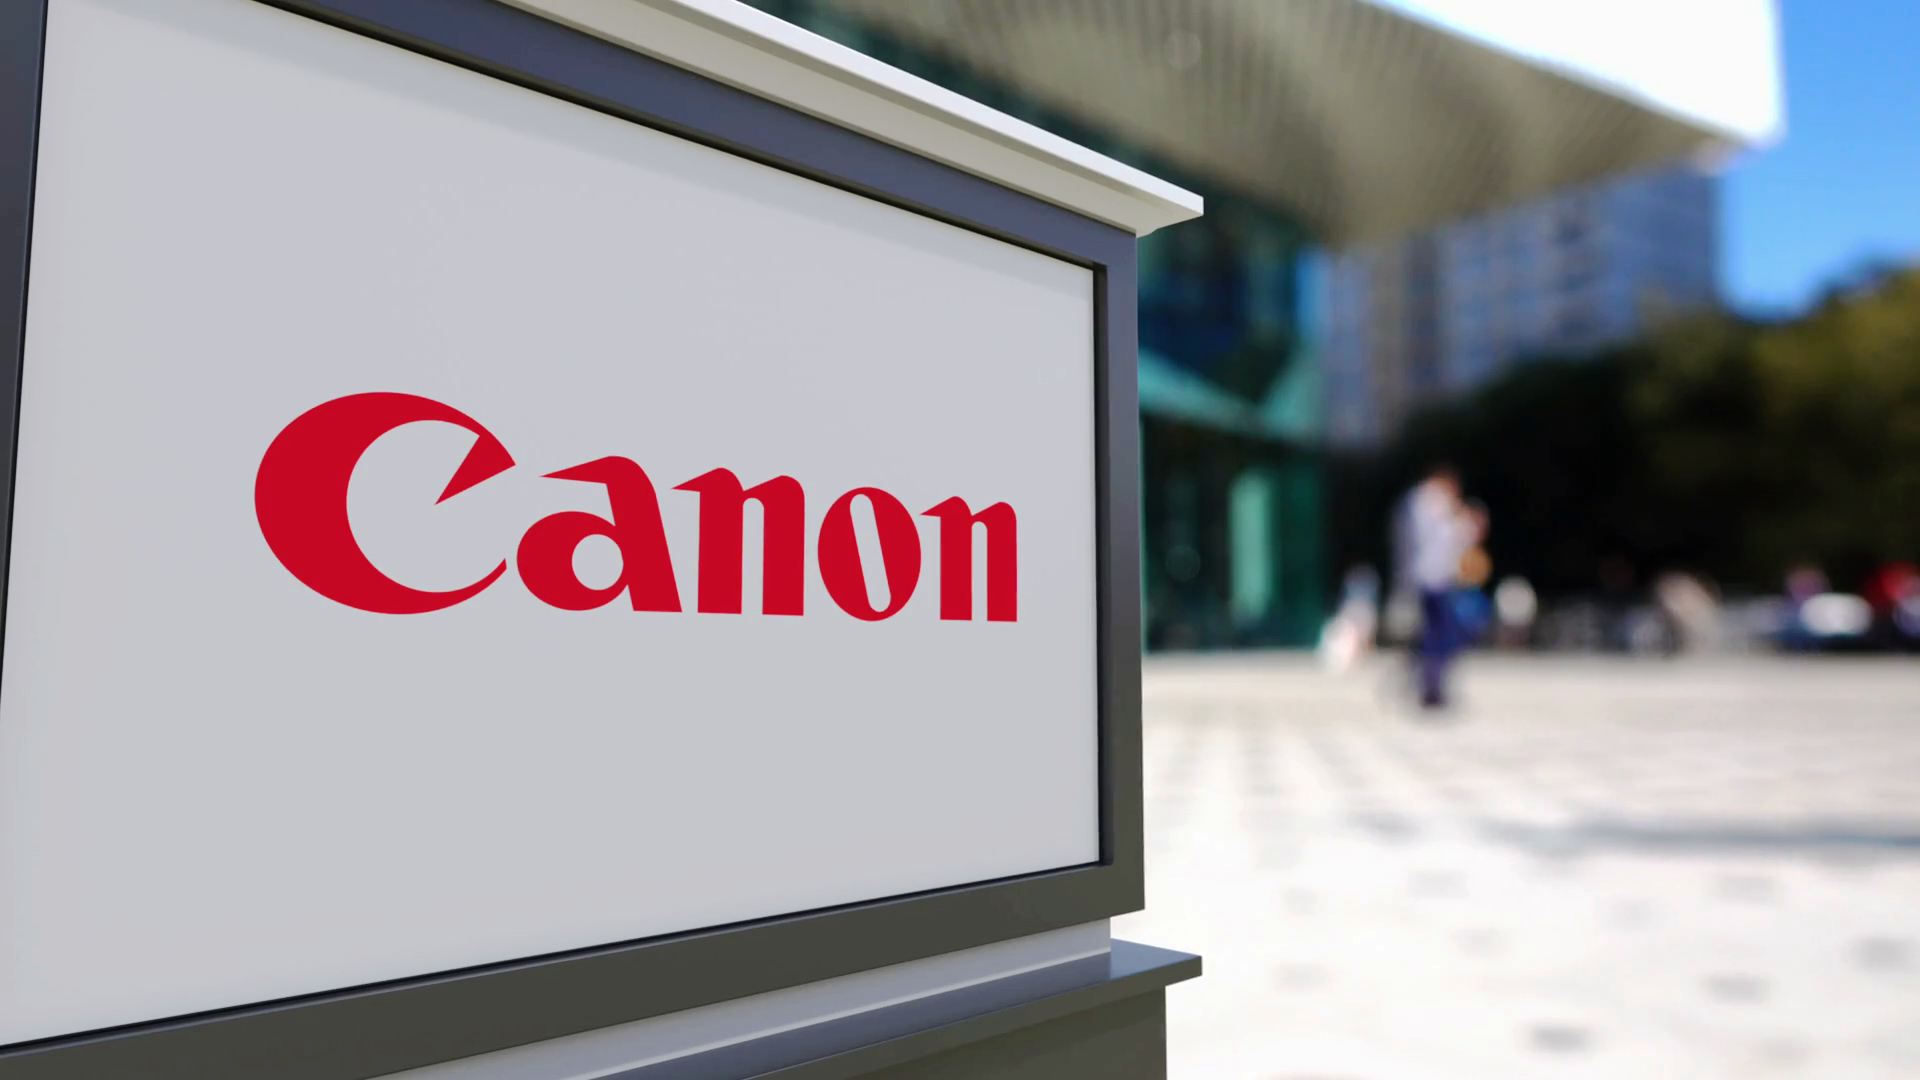 Canon Business Process Services expands business processing center operations